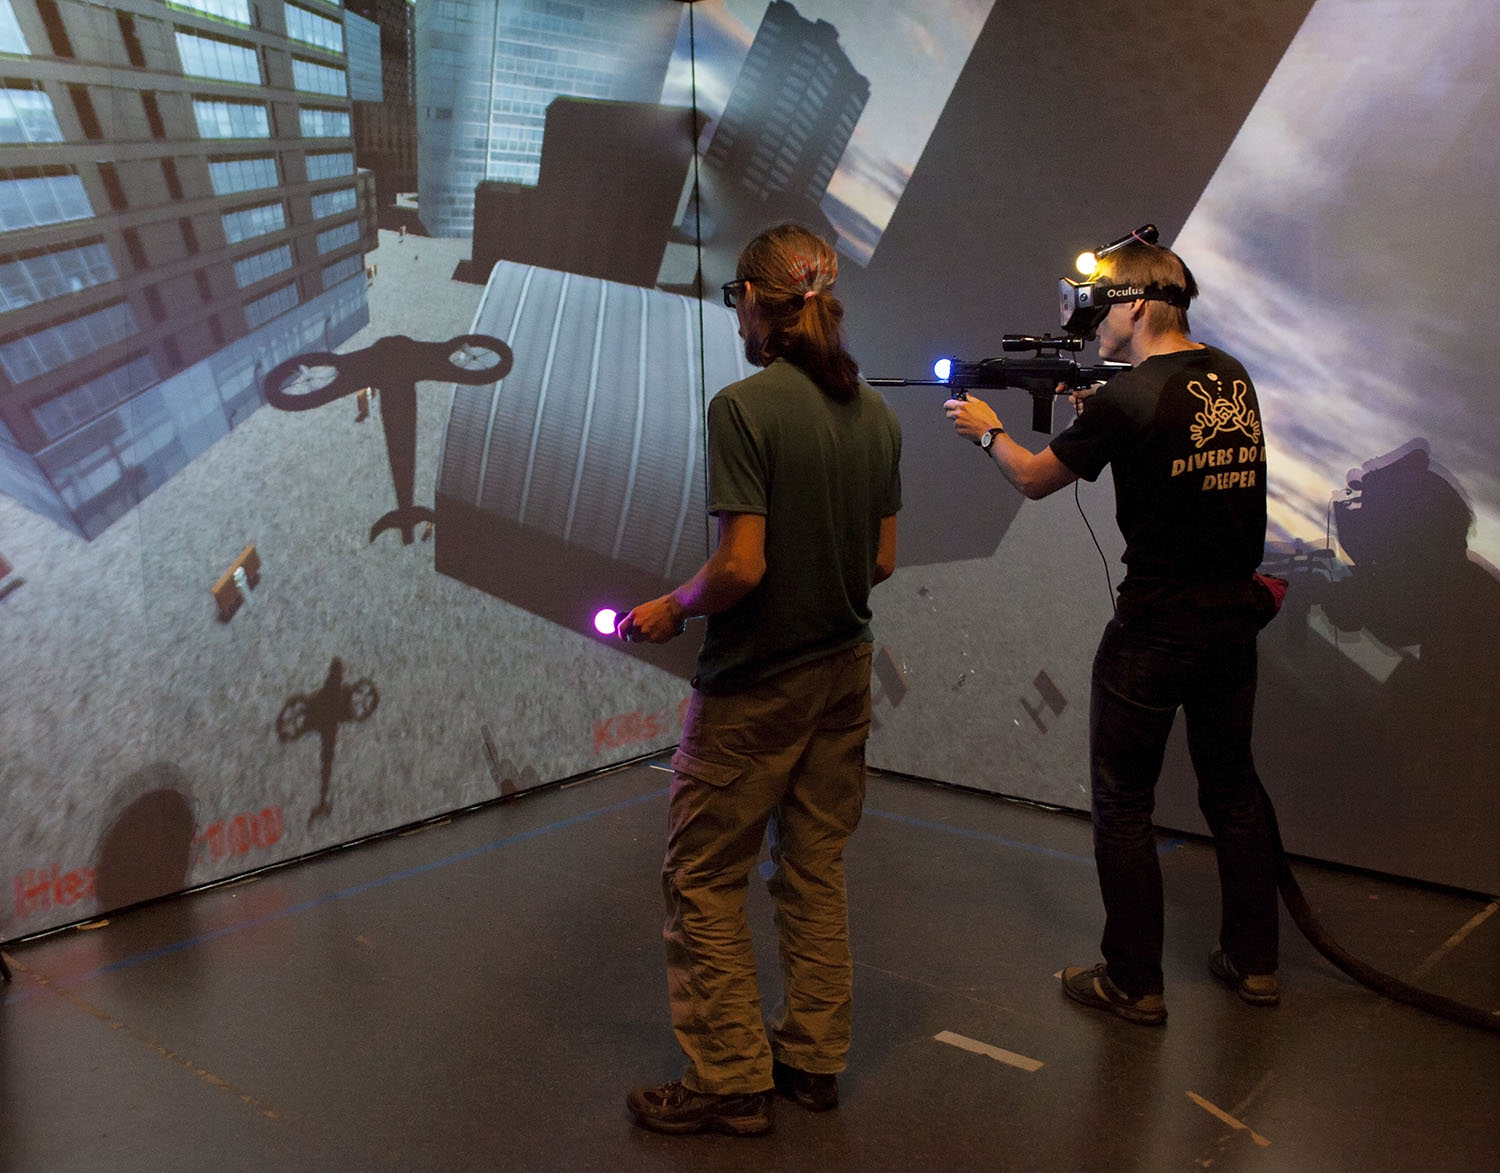 A two player co-operative game, where the player with Oculus Rift and a rifle sneaks around a city, using a laser to light up targets which can be destroyed by the second player who pilots an attack helicopter.